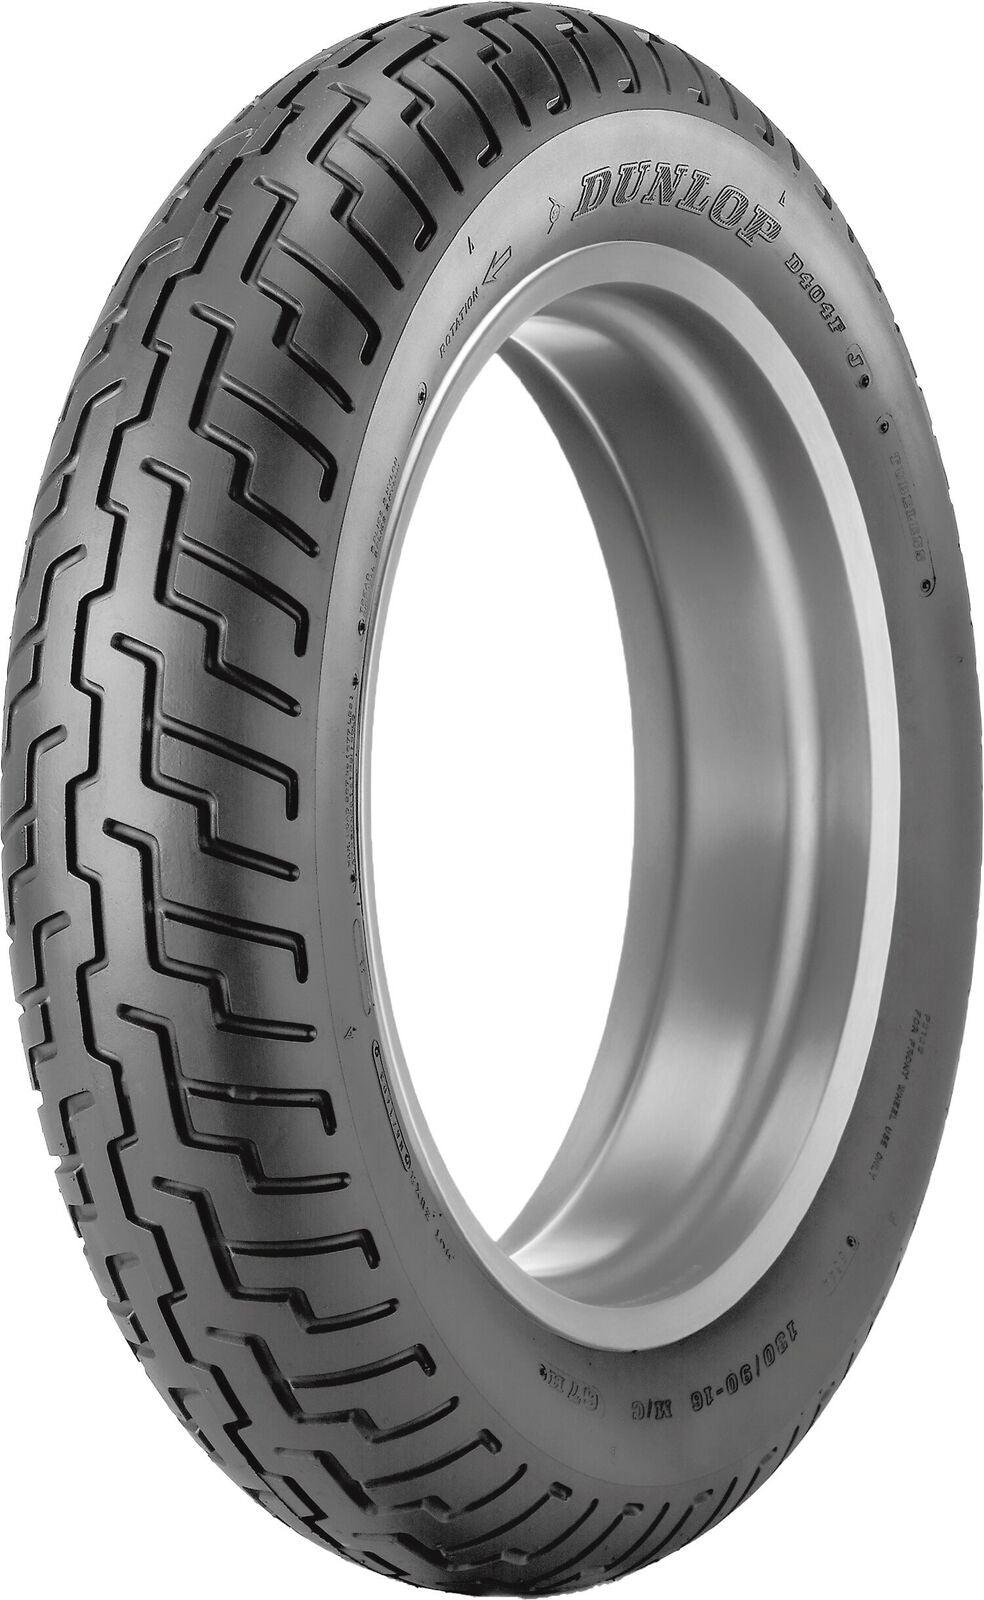 Dunlop Tire D404 Front 100/90-19 57H Bias TL Metric Cruiser Street Motorcycle - Moto Life Products